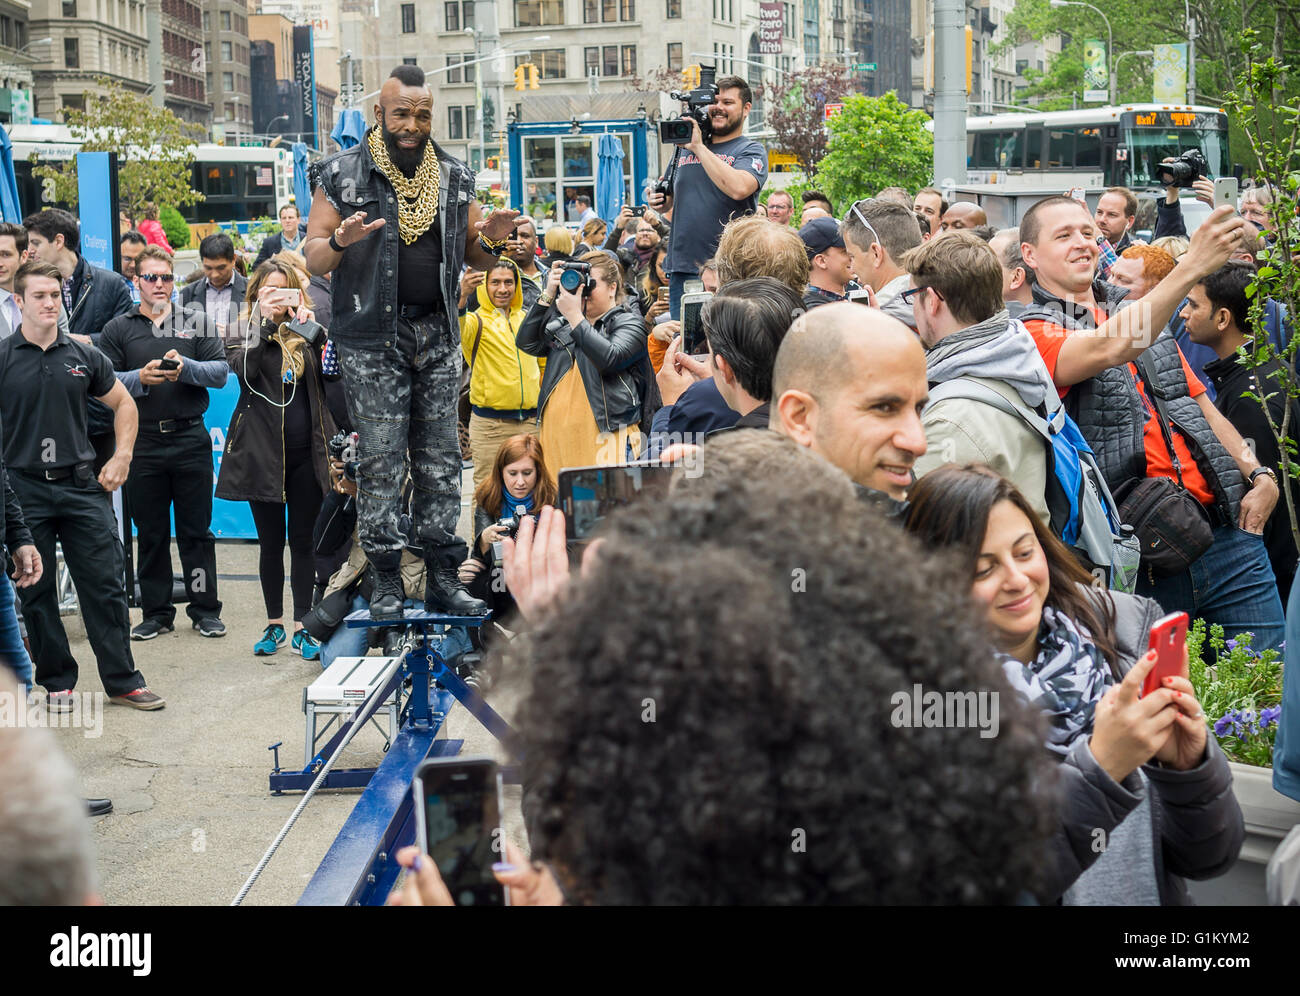 General pandemonium surrounds Mr. T during a promotional event in New York for Fairfield Inn & Suites, a brand of Marriott on Tuesday, May 17, 2016. (© Richard B. Levine) Stock Photo